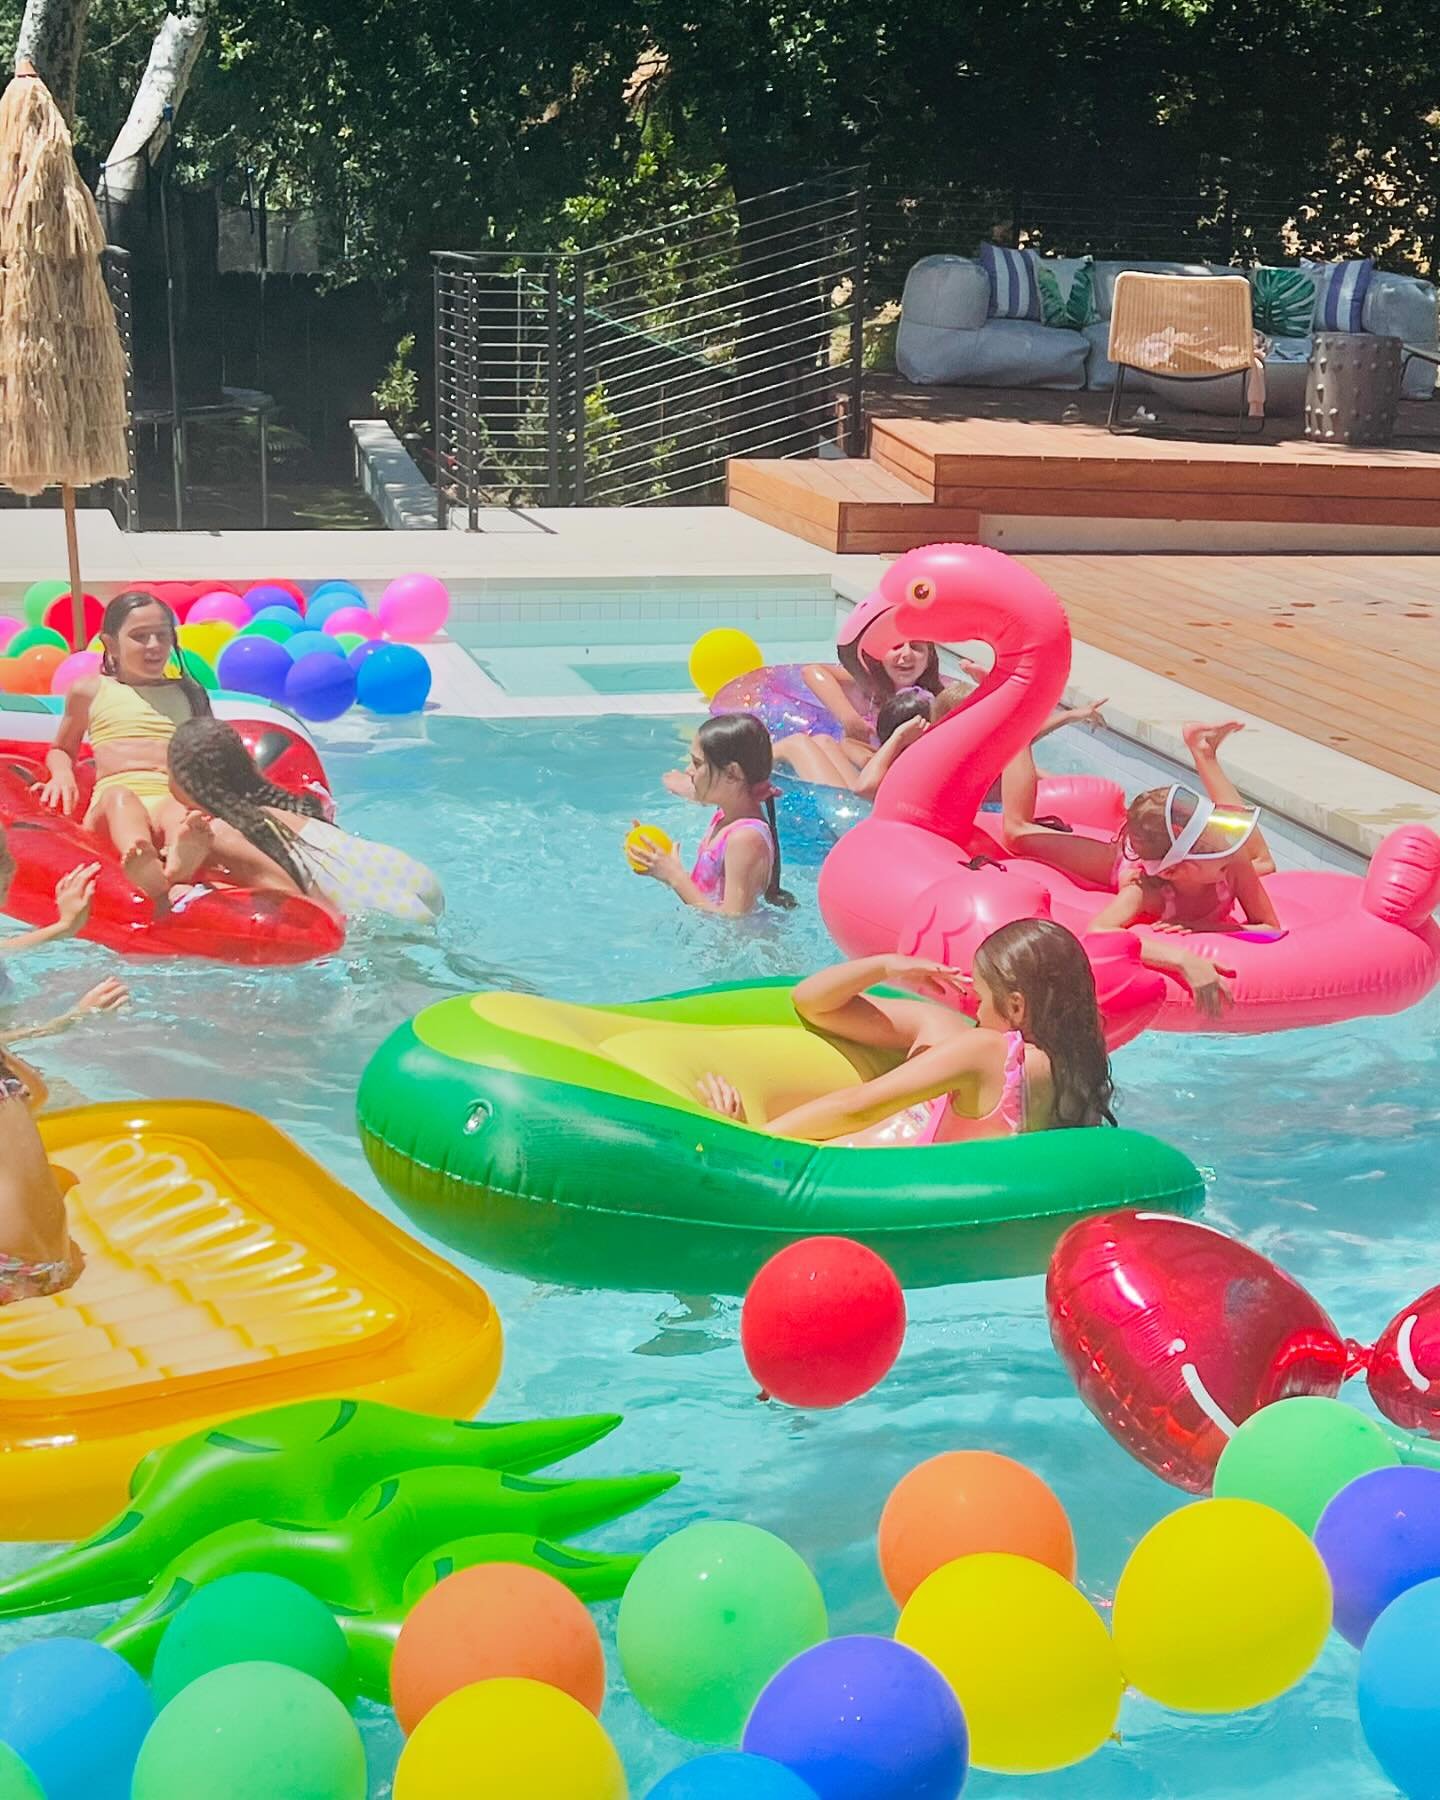 SUMMERTIME 🍒🥑🍉🌈💦⁣
⁣⁣
It&rsquo;s time to start planning all those summer pool parties and we&rsquo;ve got you covered! Did you know you can find us on @liketoknow.it as we share where to get all our fav party (and interior) finds! Follow us @side